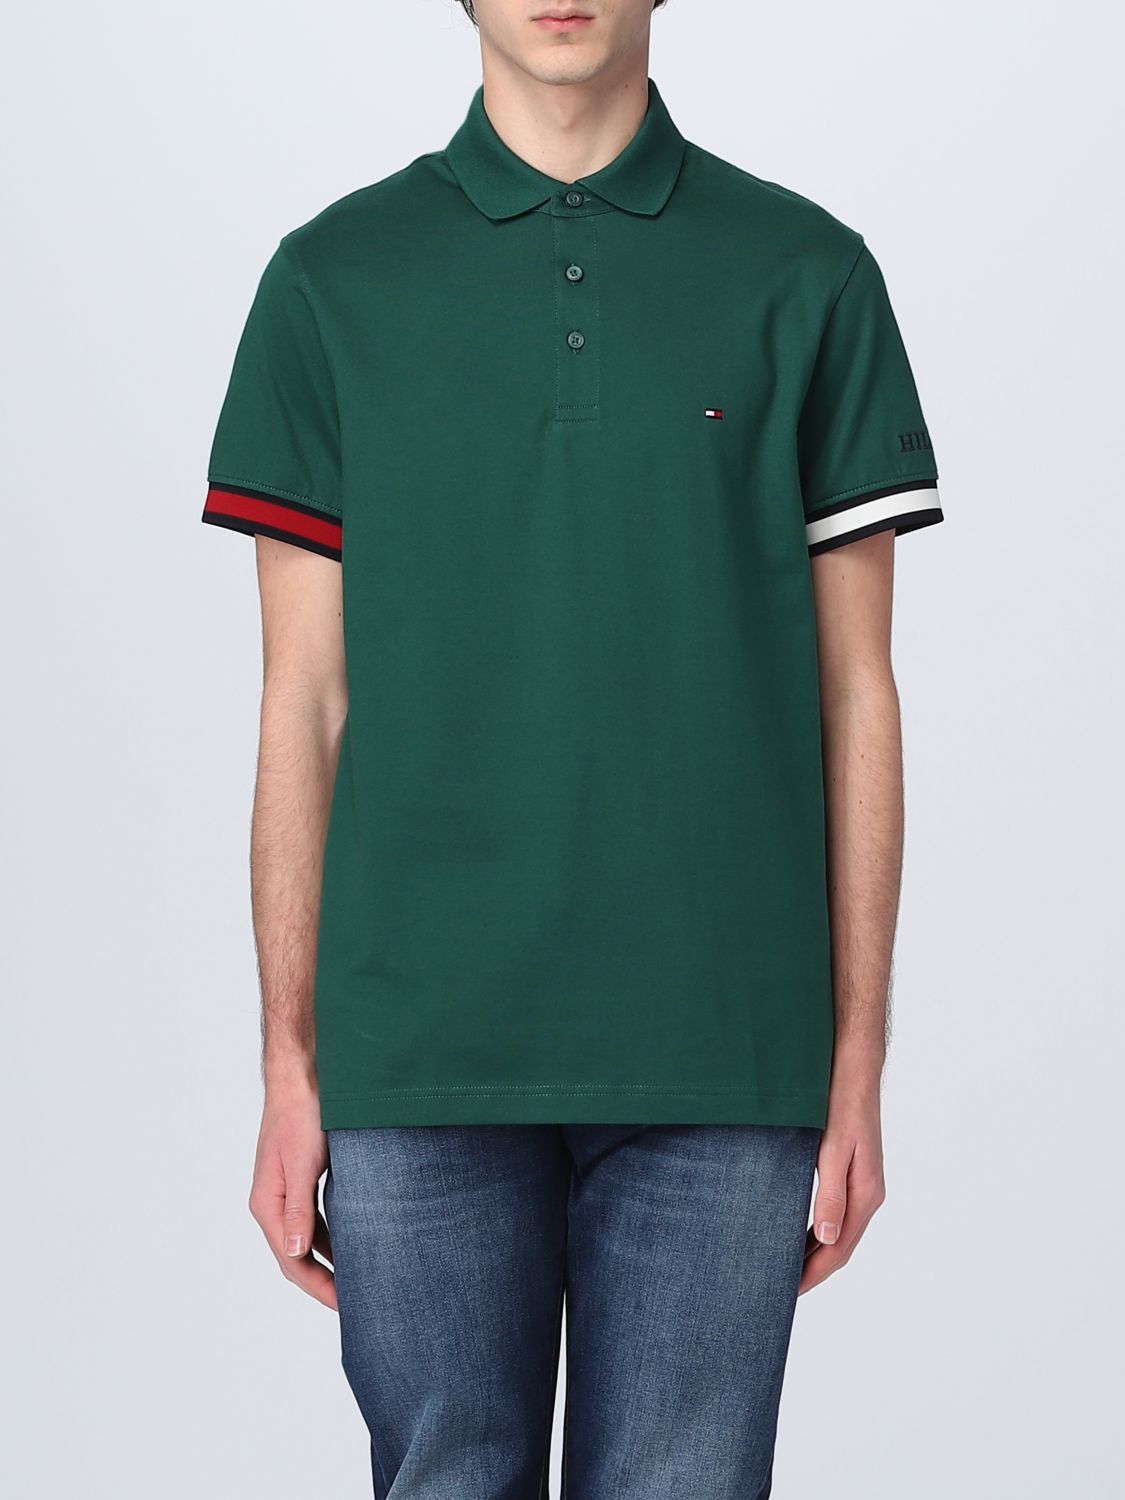 TOMMY HILFIGER: shirt for man - Green | polo shirt MW0MW29528 online on